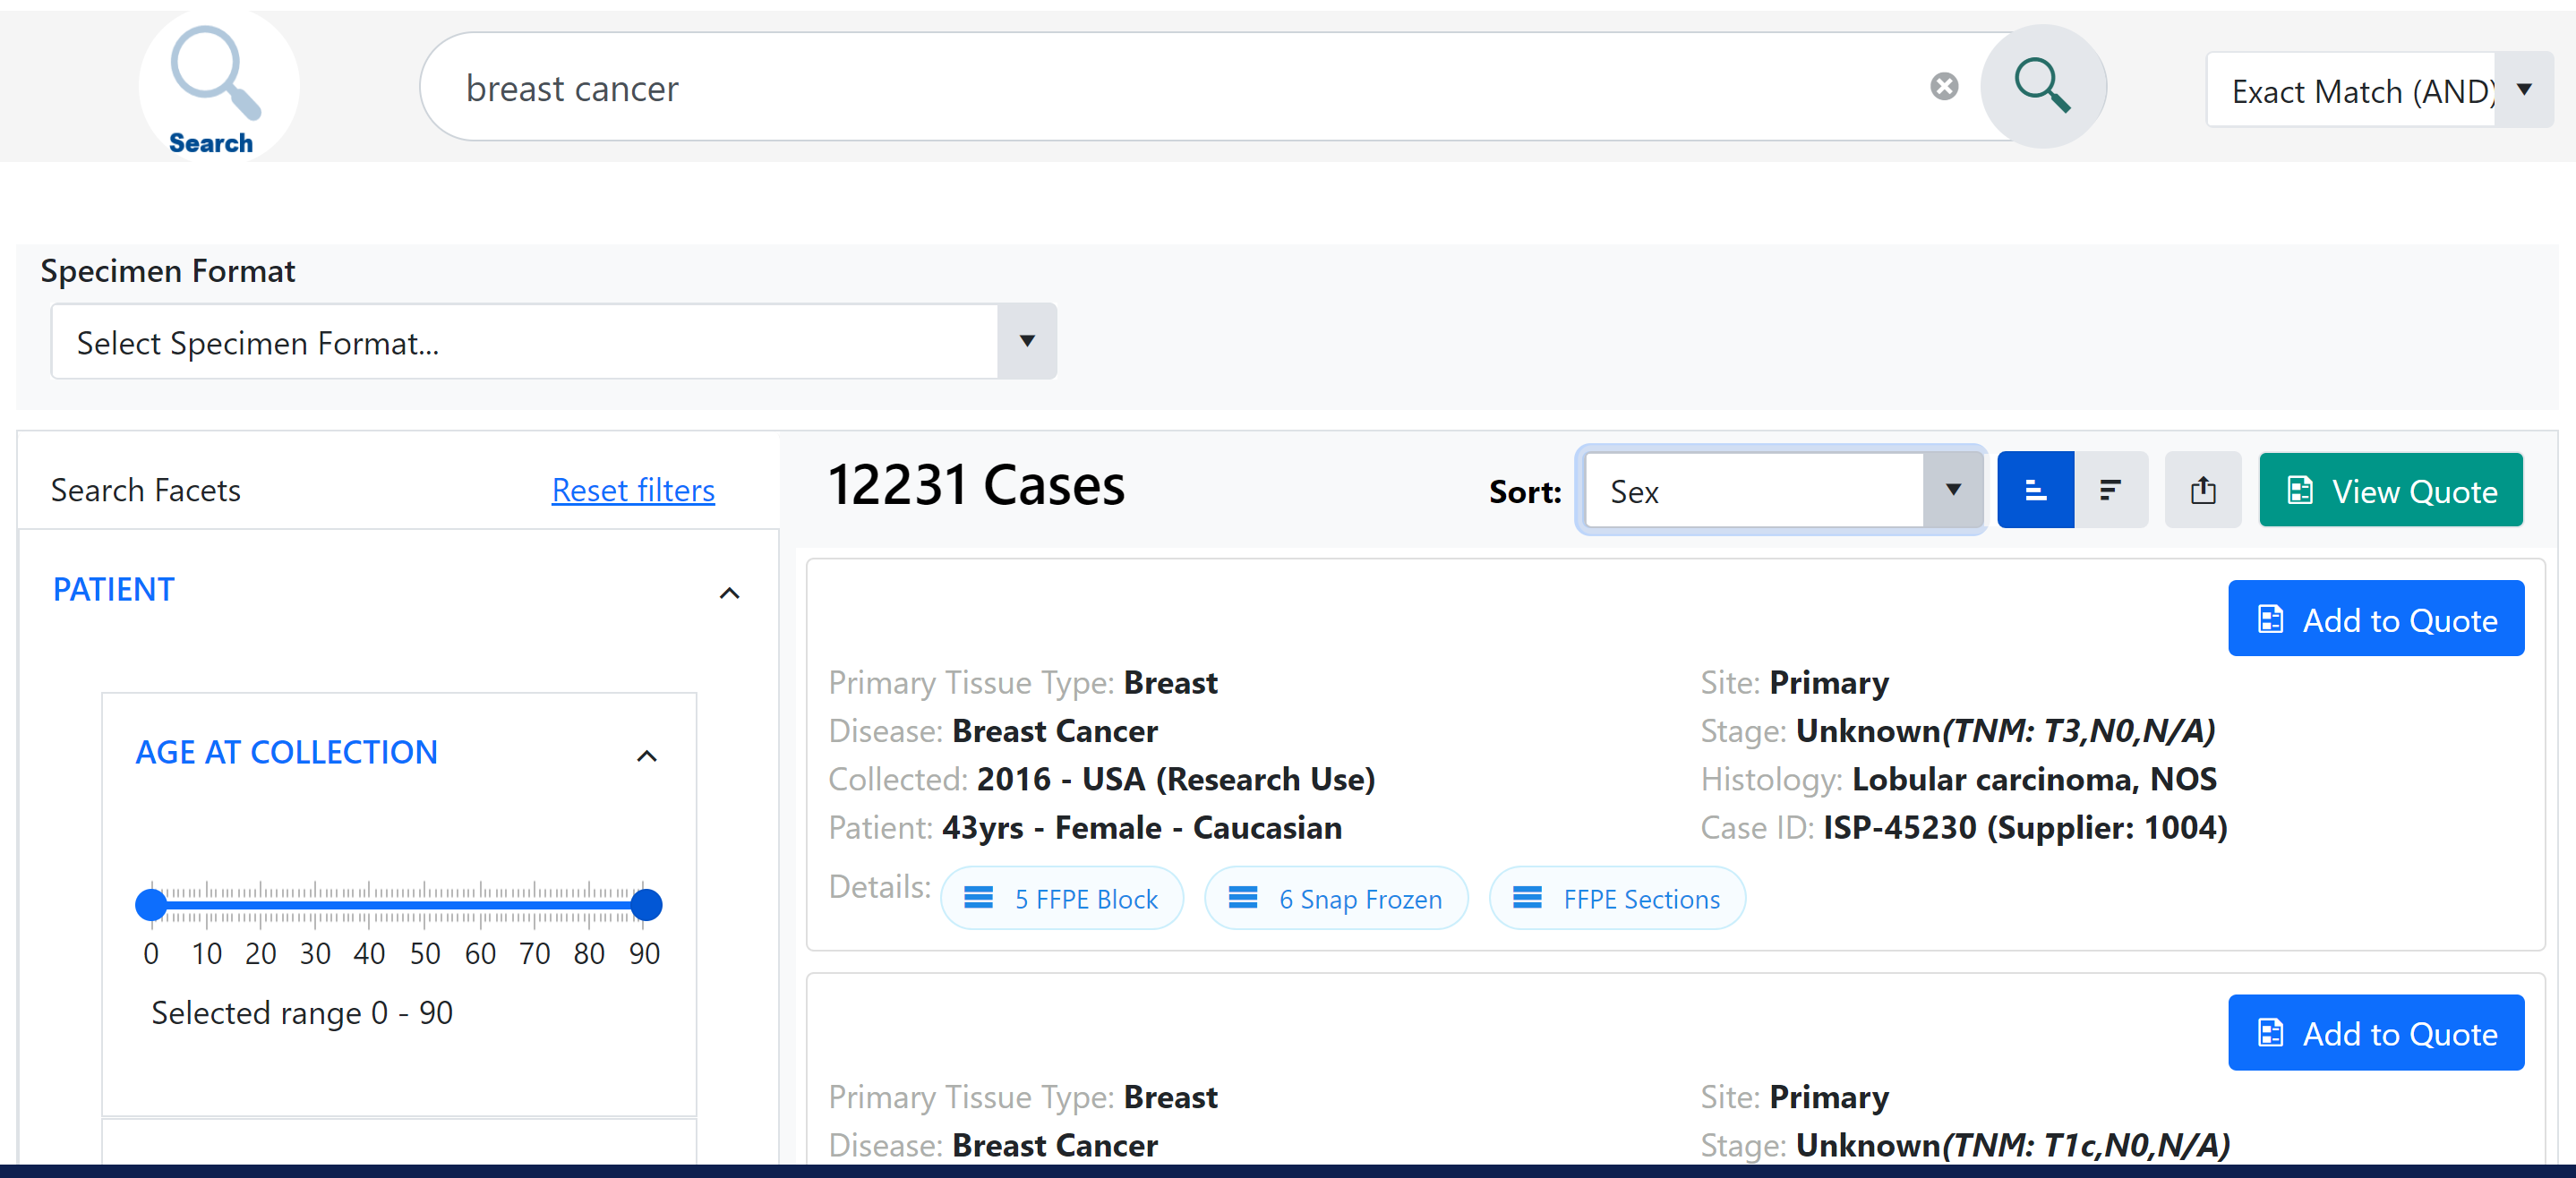 iSpecimen’s enhanced Marketplace now enables more precise specimen matching through an easy-to-use interface that allows researchers to search for desired samples via a Google-like search bar, as well as access new data fields and expanded searchable data, such as smoking and alcohol history.